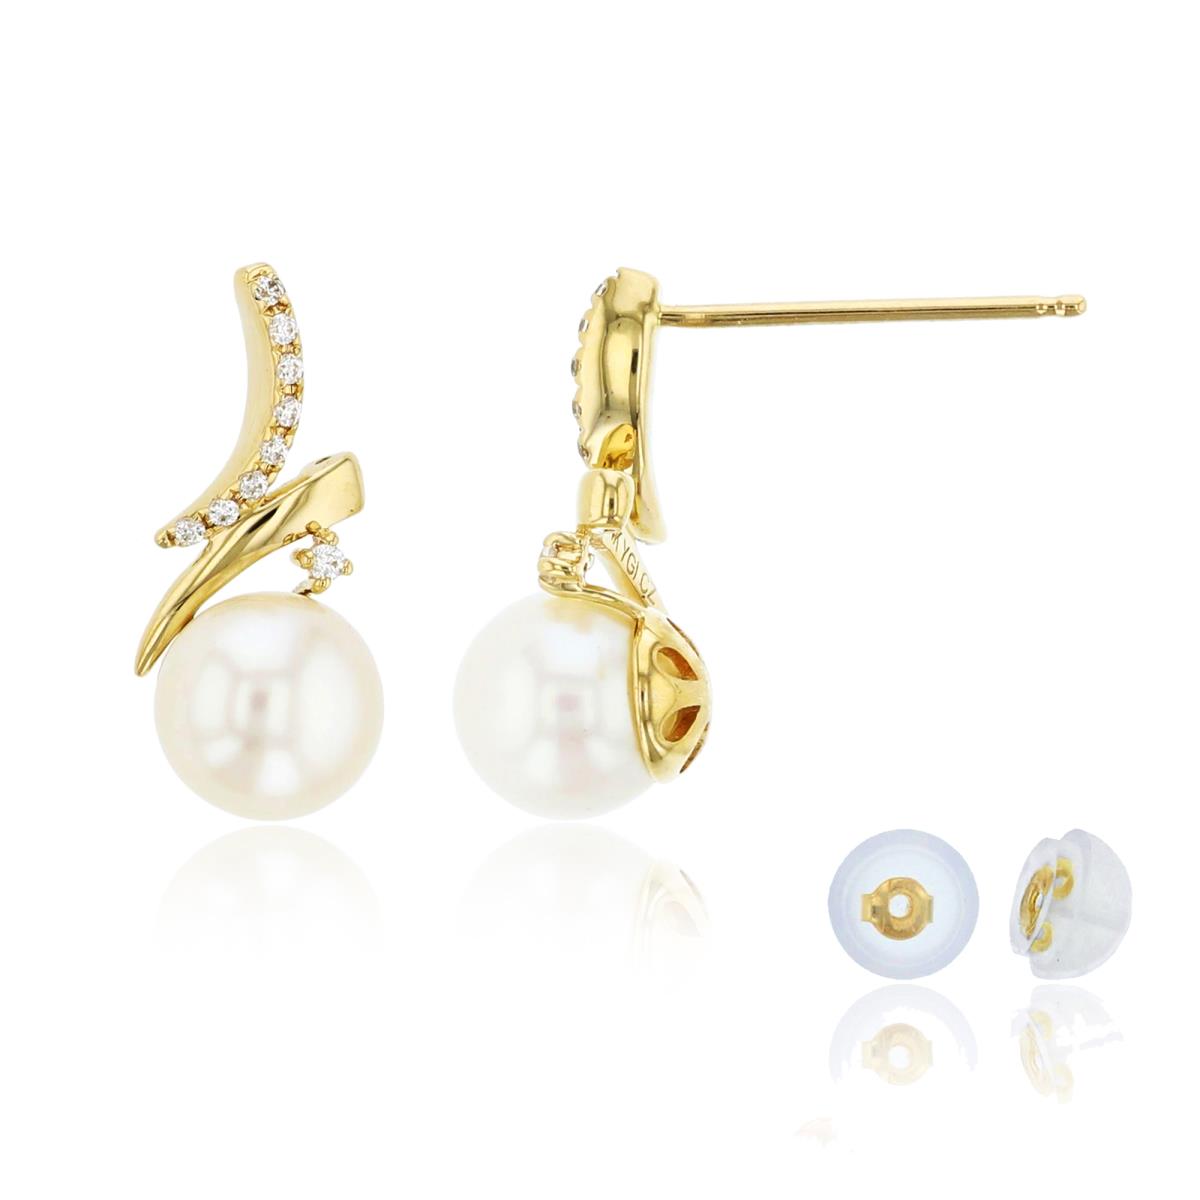 10K Yellow Gold 0.04 CTTW Rnd Diamonds & 6mm Rnd White Pearl  Earring with Silicone Back